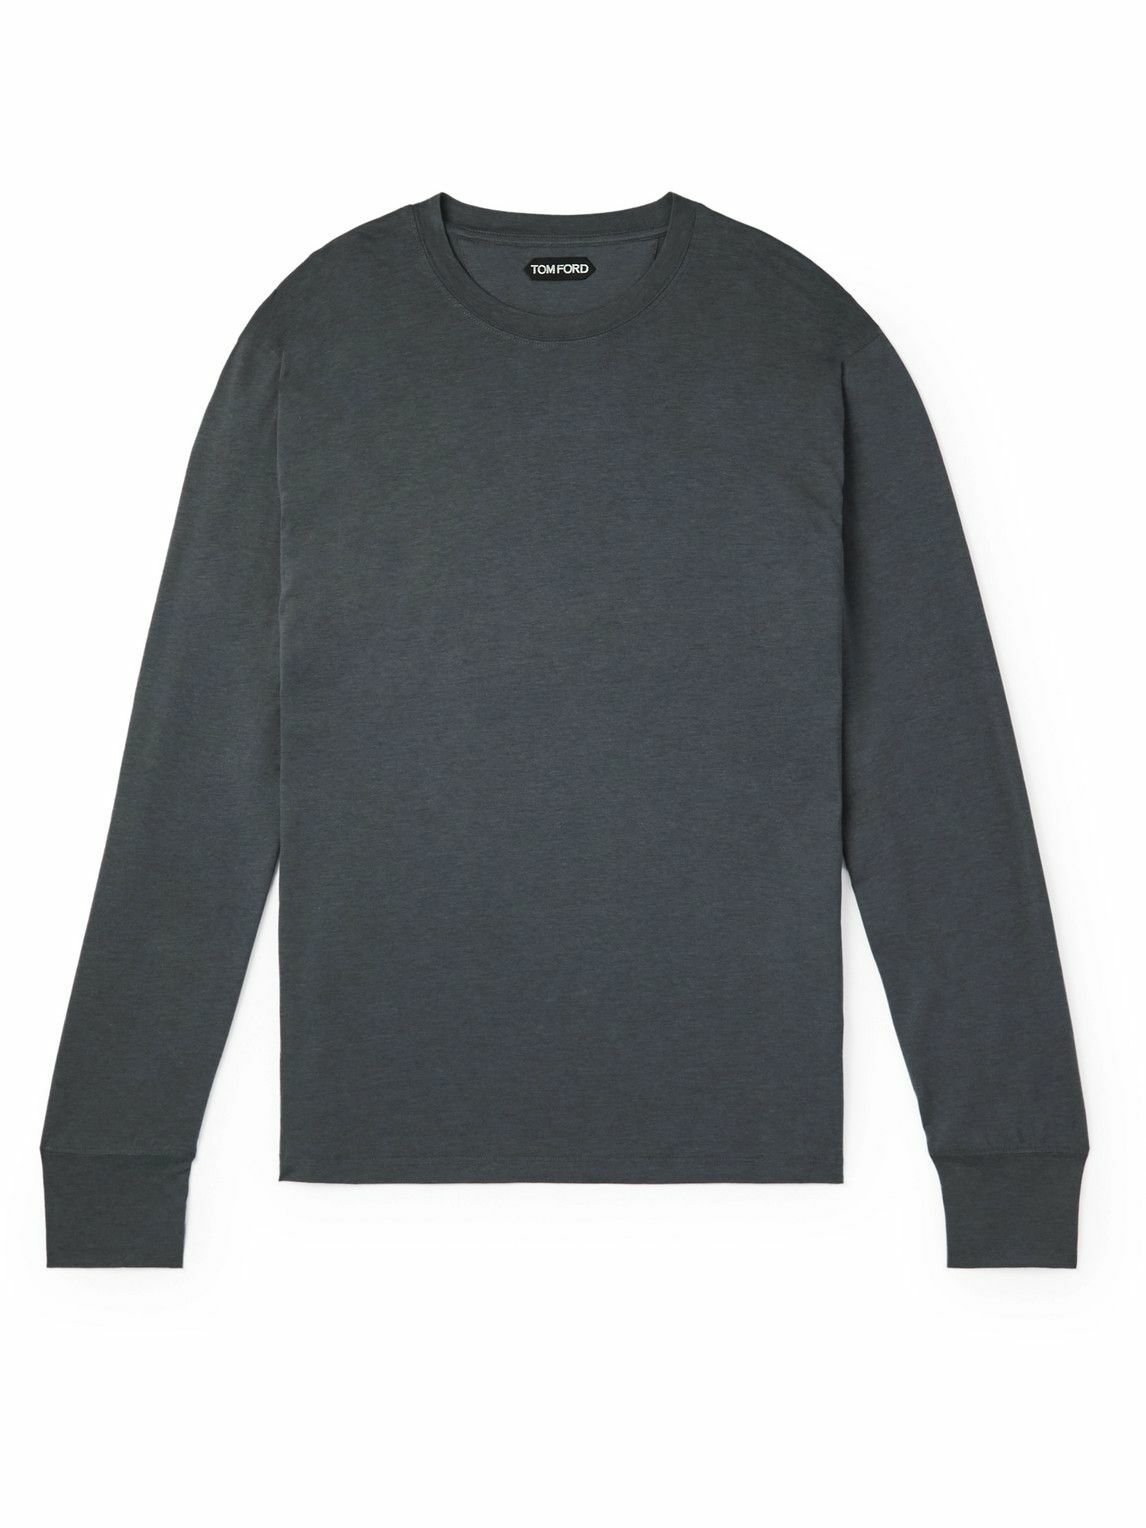 TOM FORD - Lyocell and Cotton-Blend Jersey T-Shirt - Gray TOM FORD